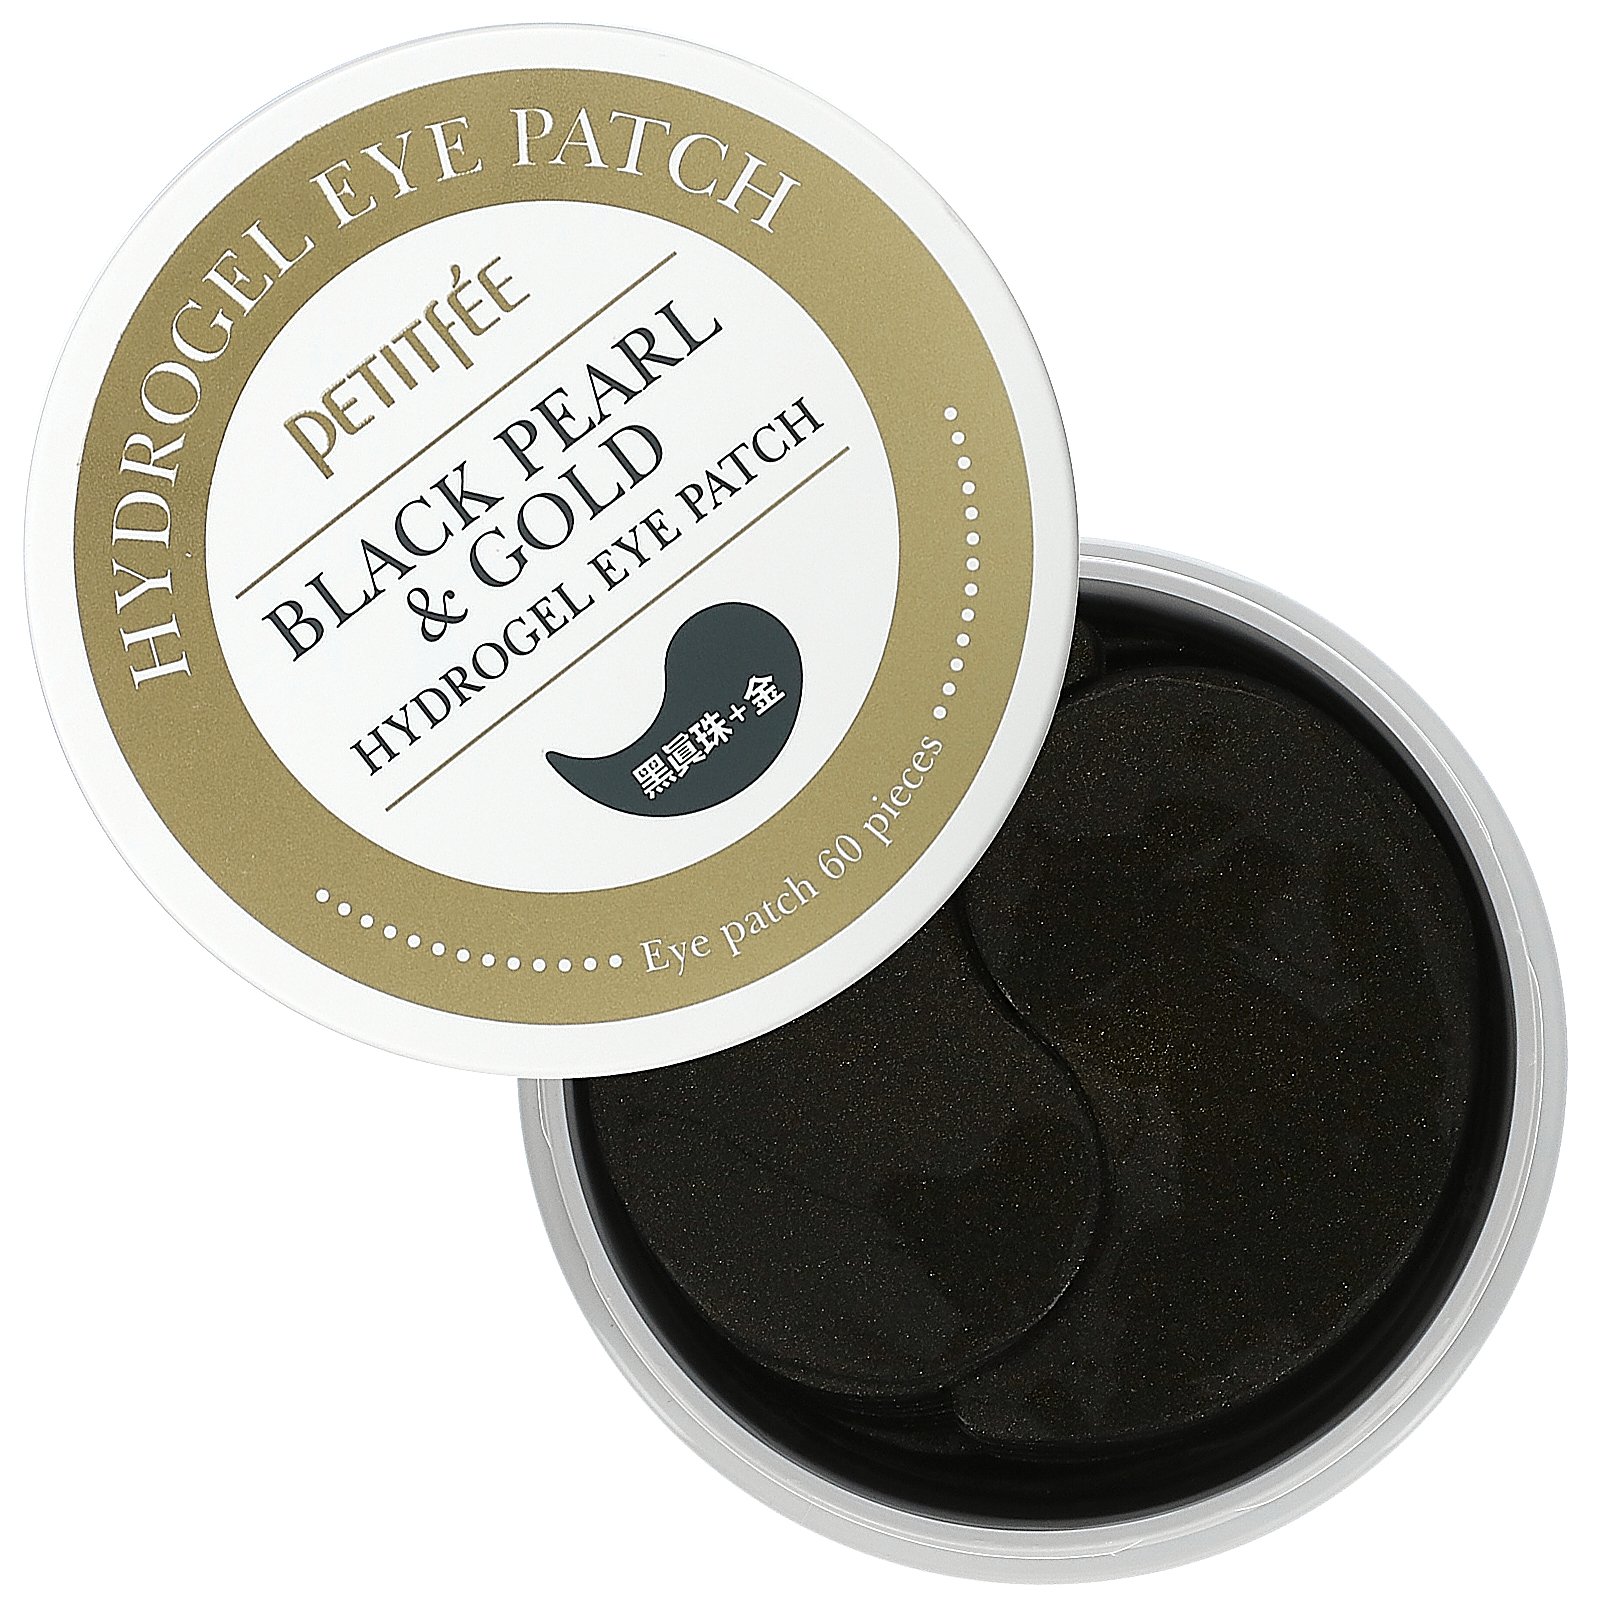 Petitfee Black Pearl & Gold Hydrogel Eye Patch, 60 Patches - image 3 of 4